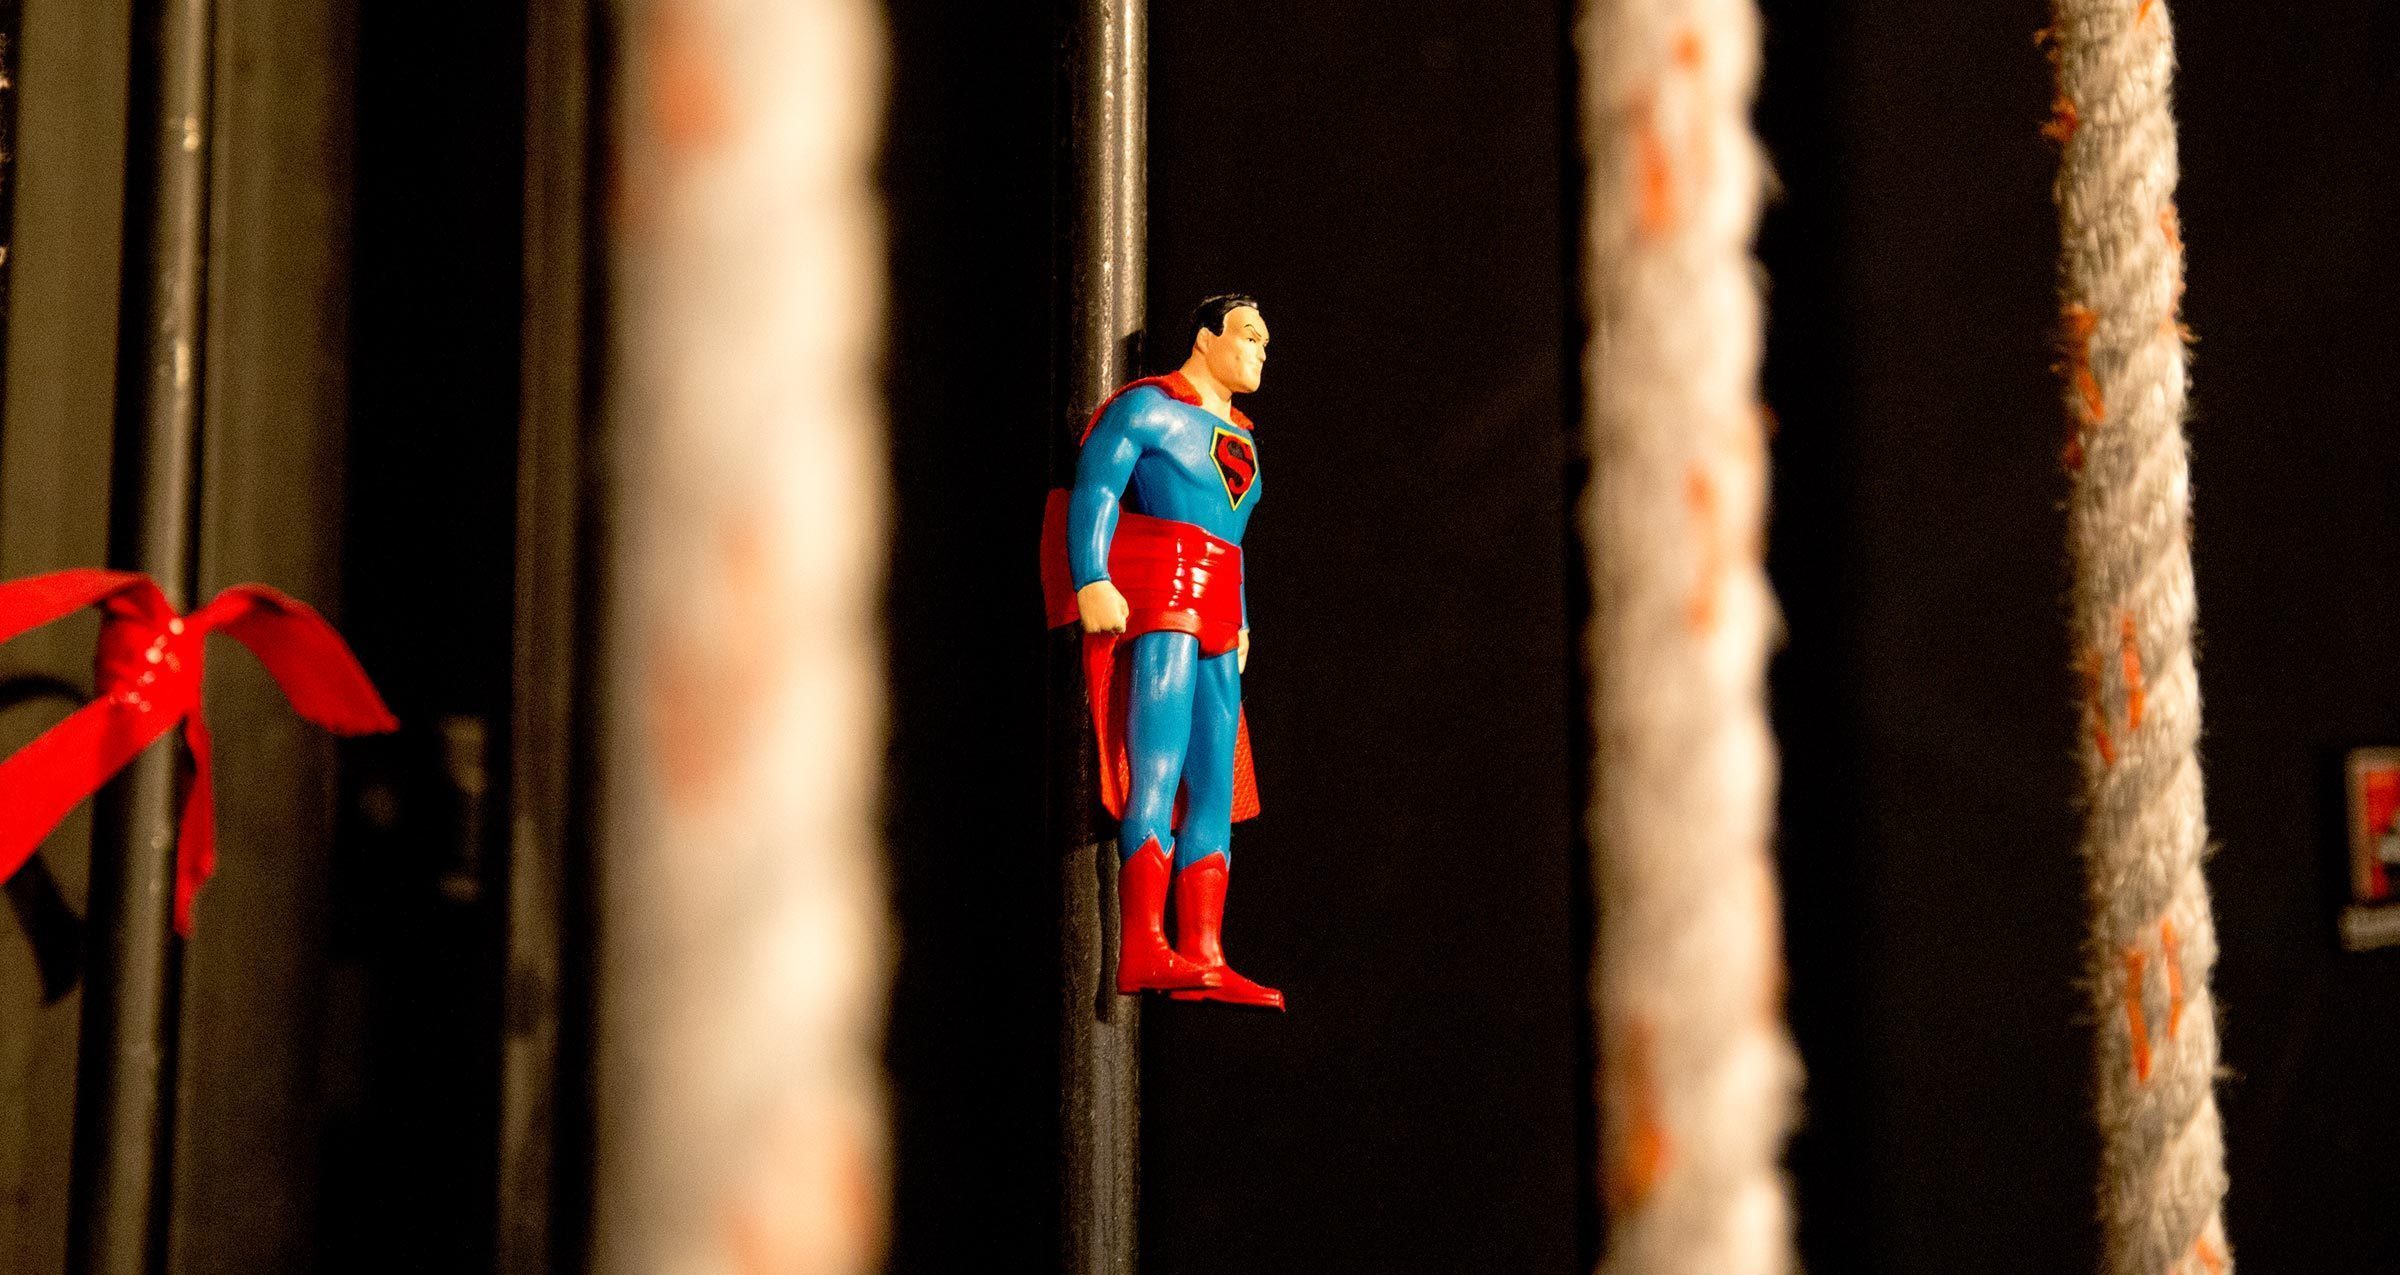 Superman backstage marking the curtain line